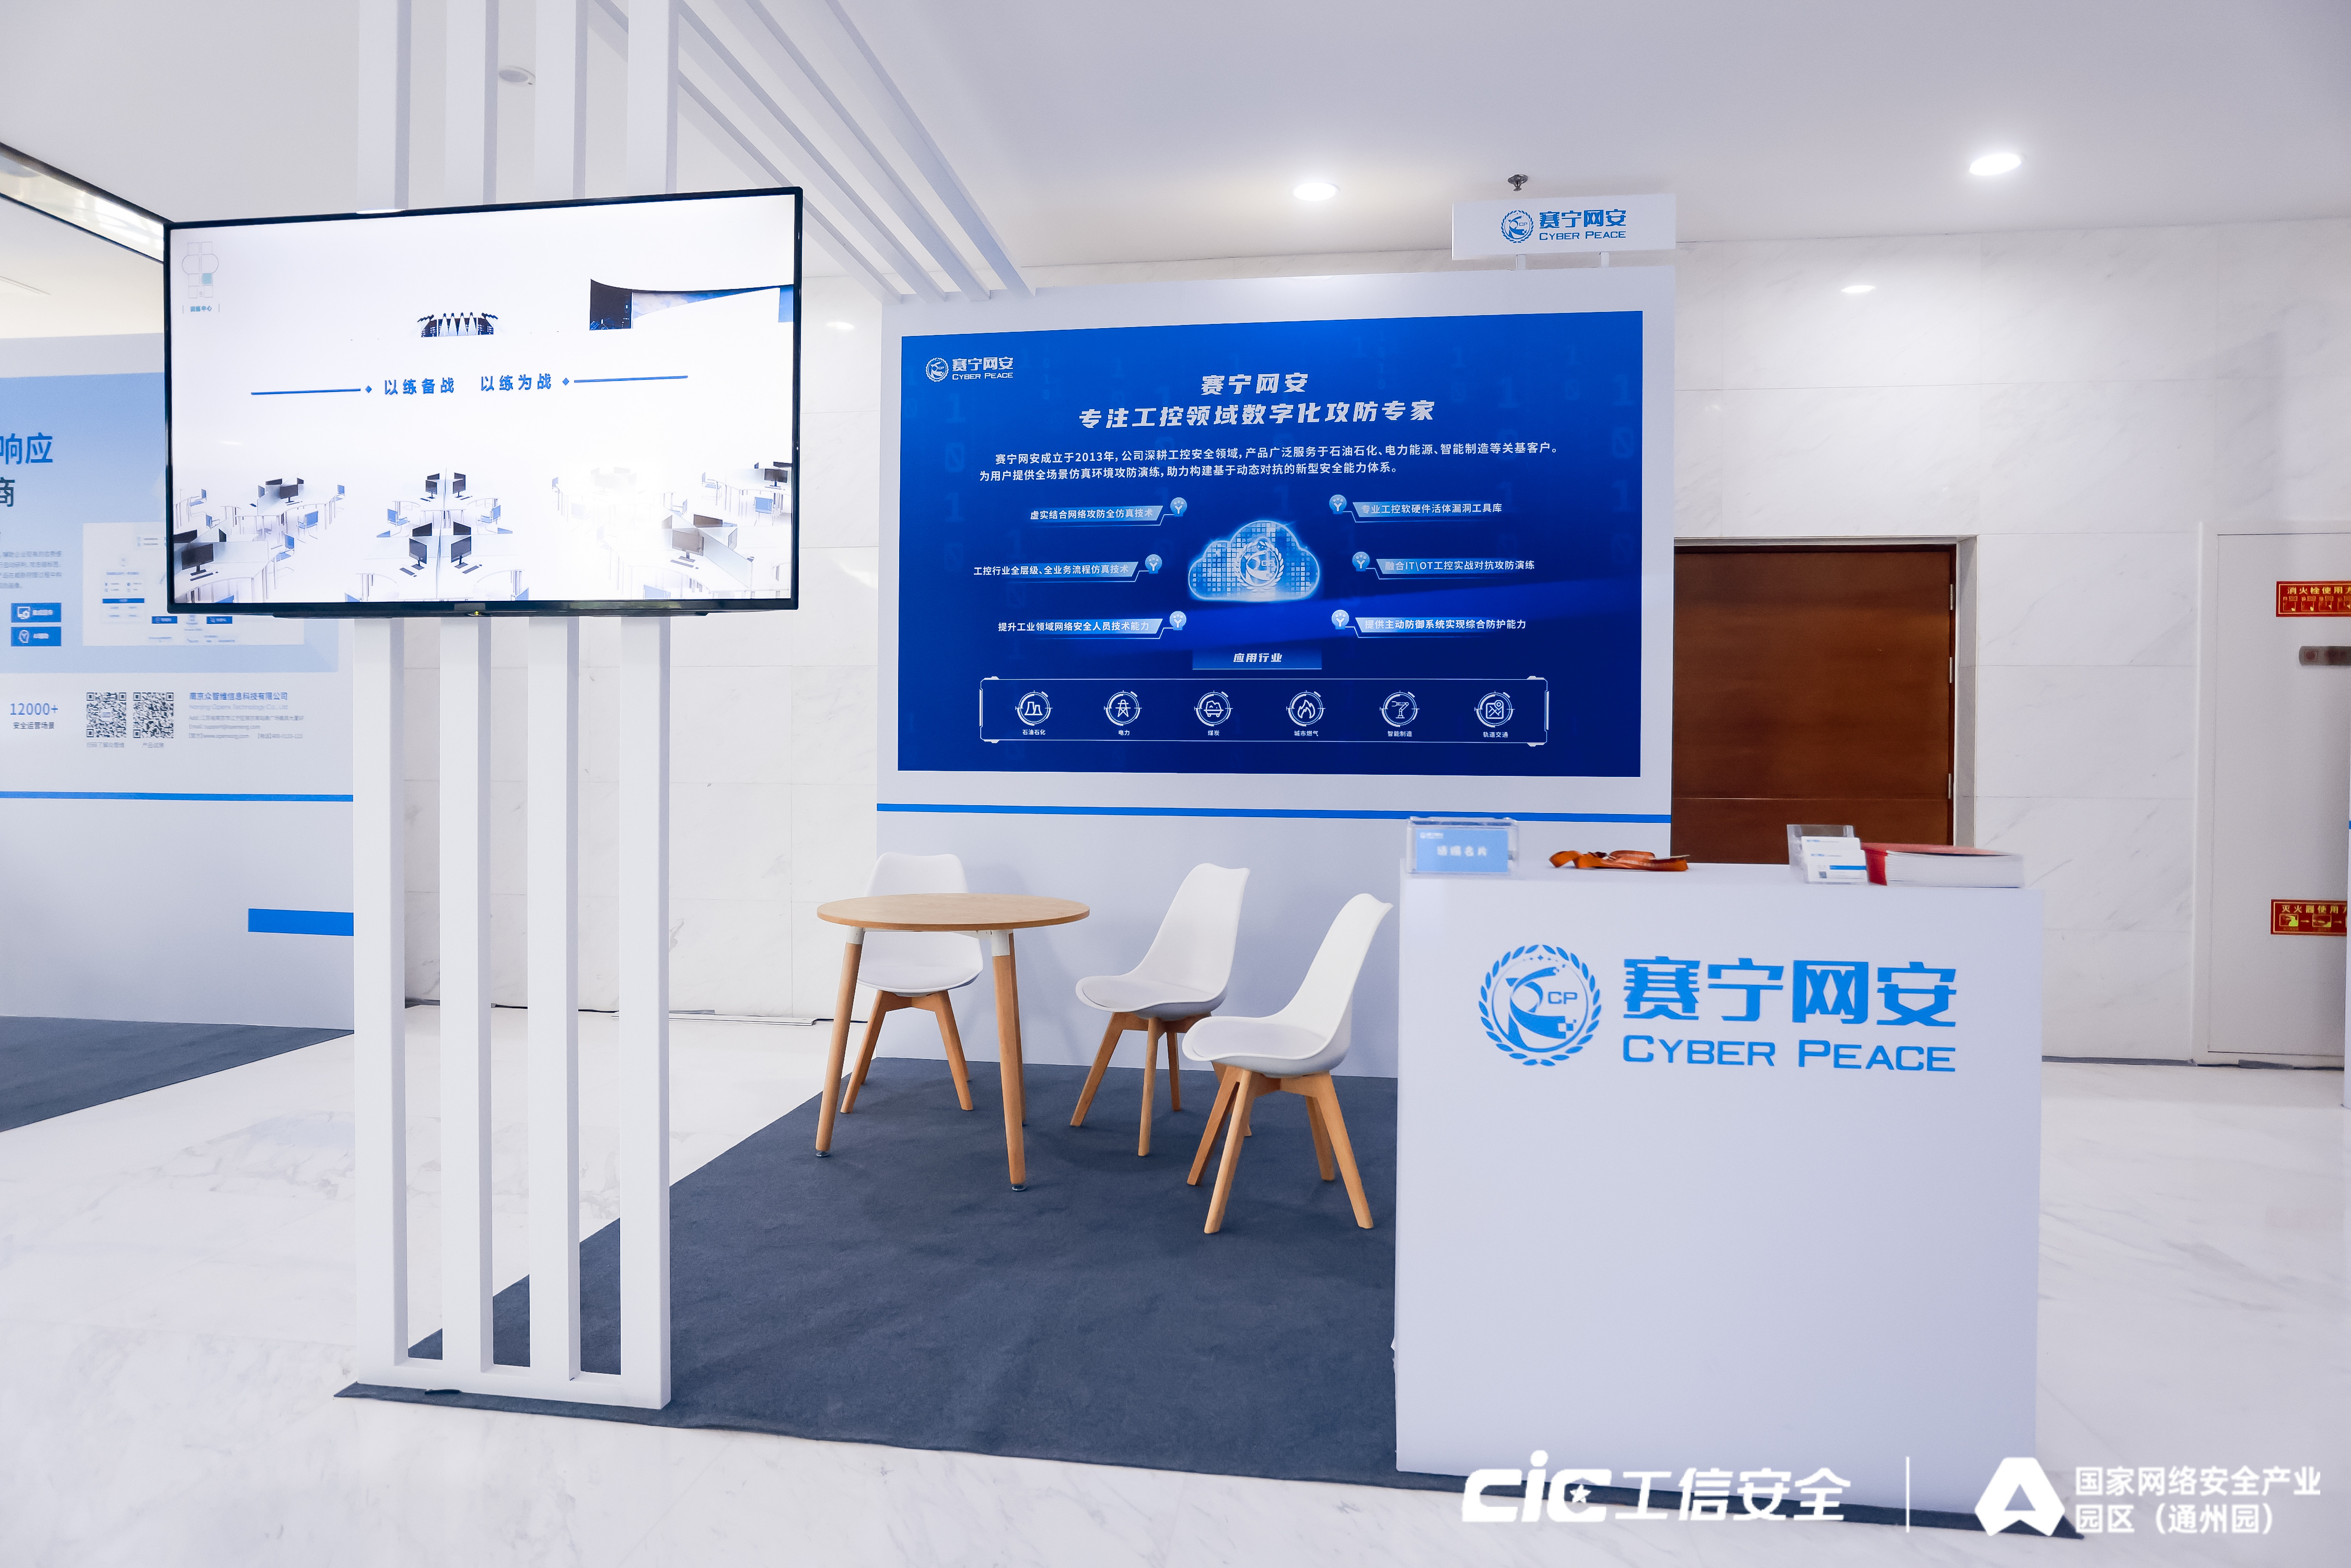 Saining Network Security Booth Map